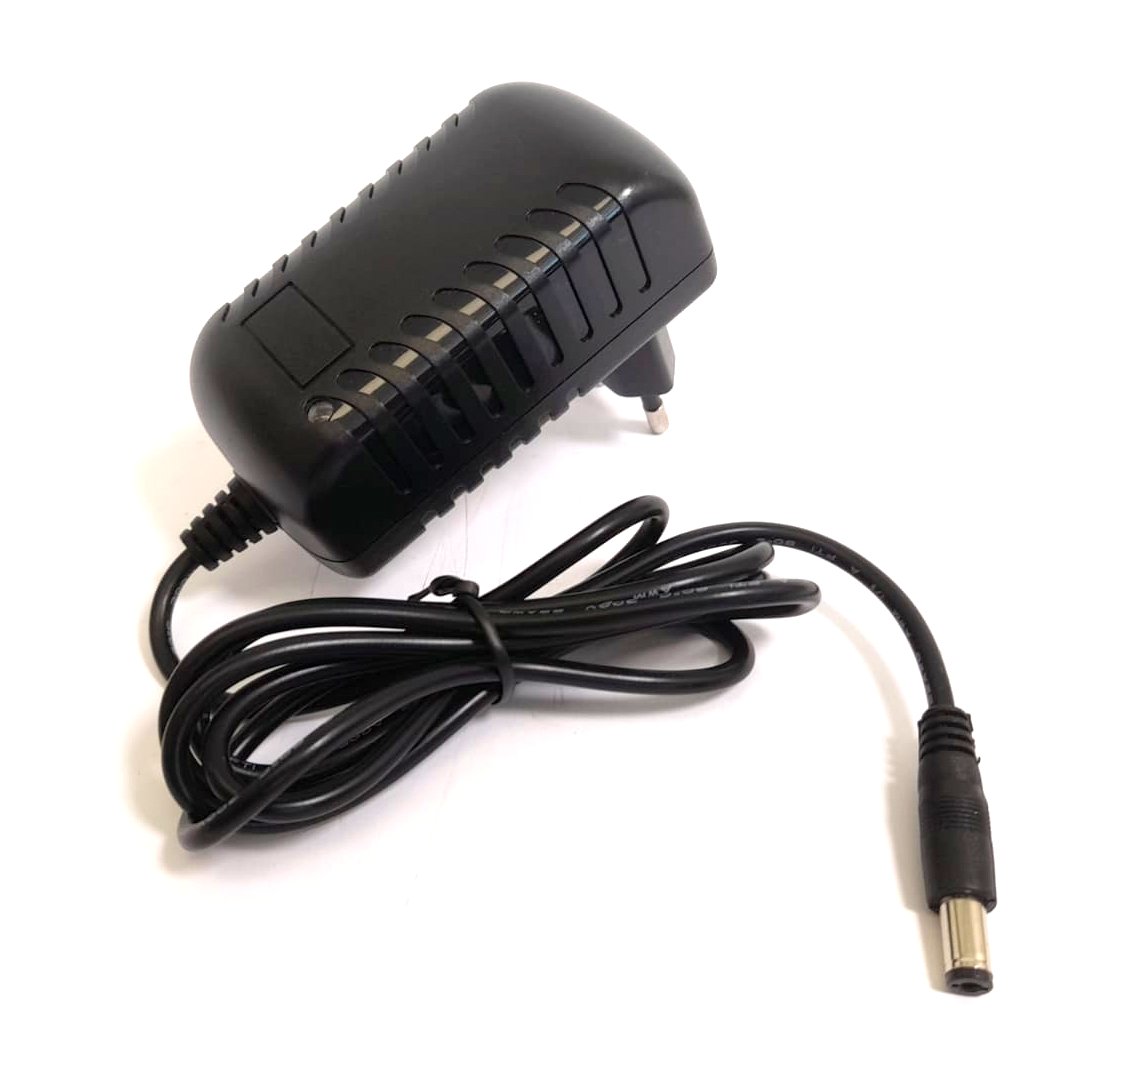 3S Charger for Li-Ion-Batteries 10.8V - 11.1 1A Round Plug